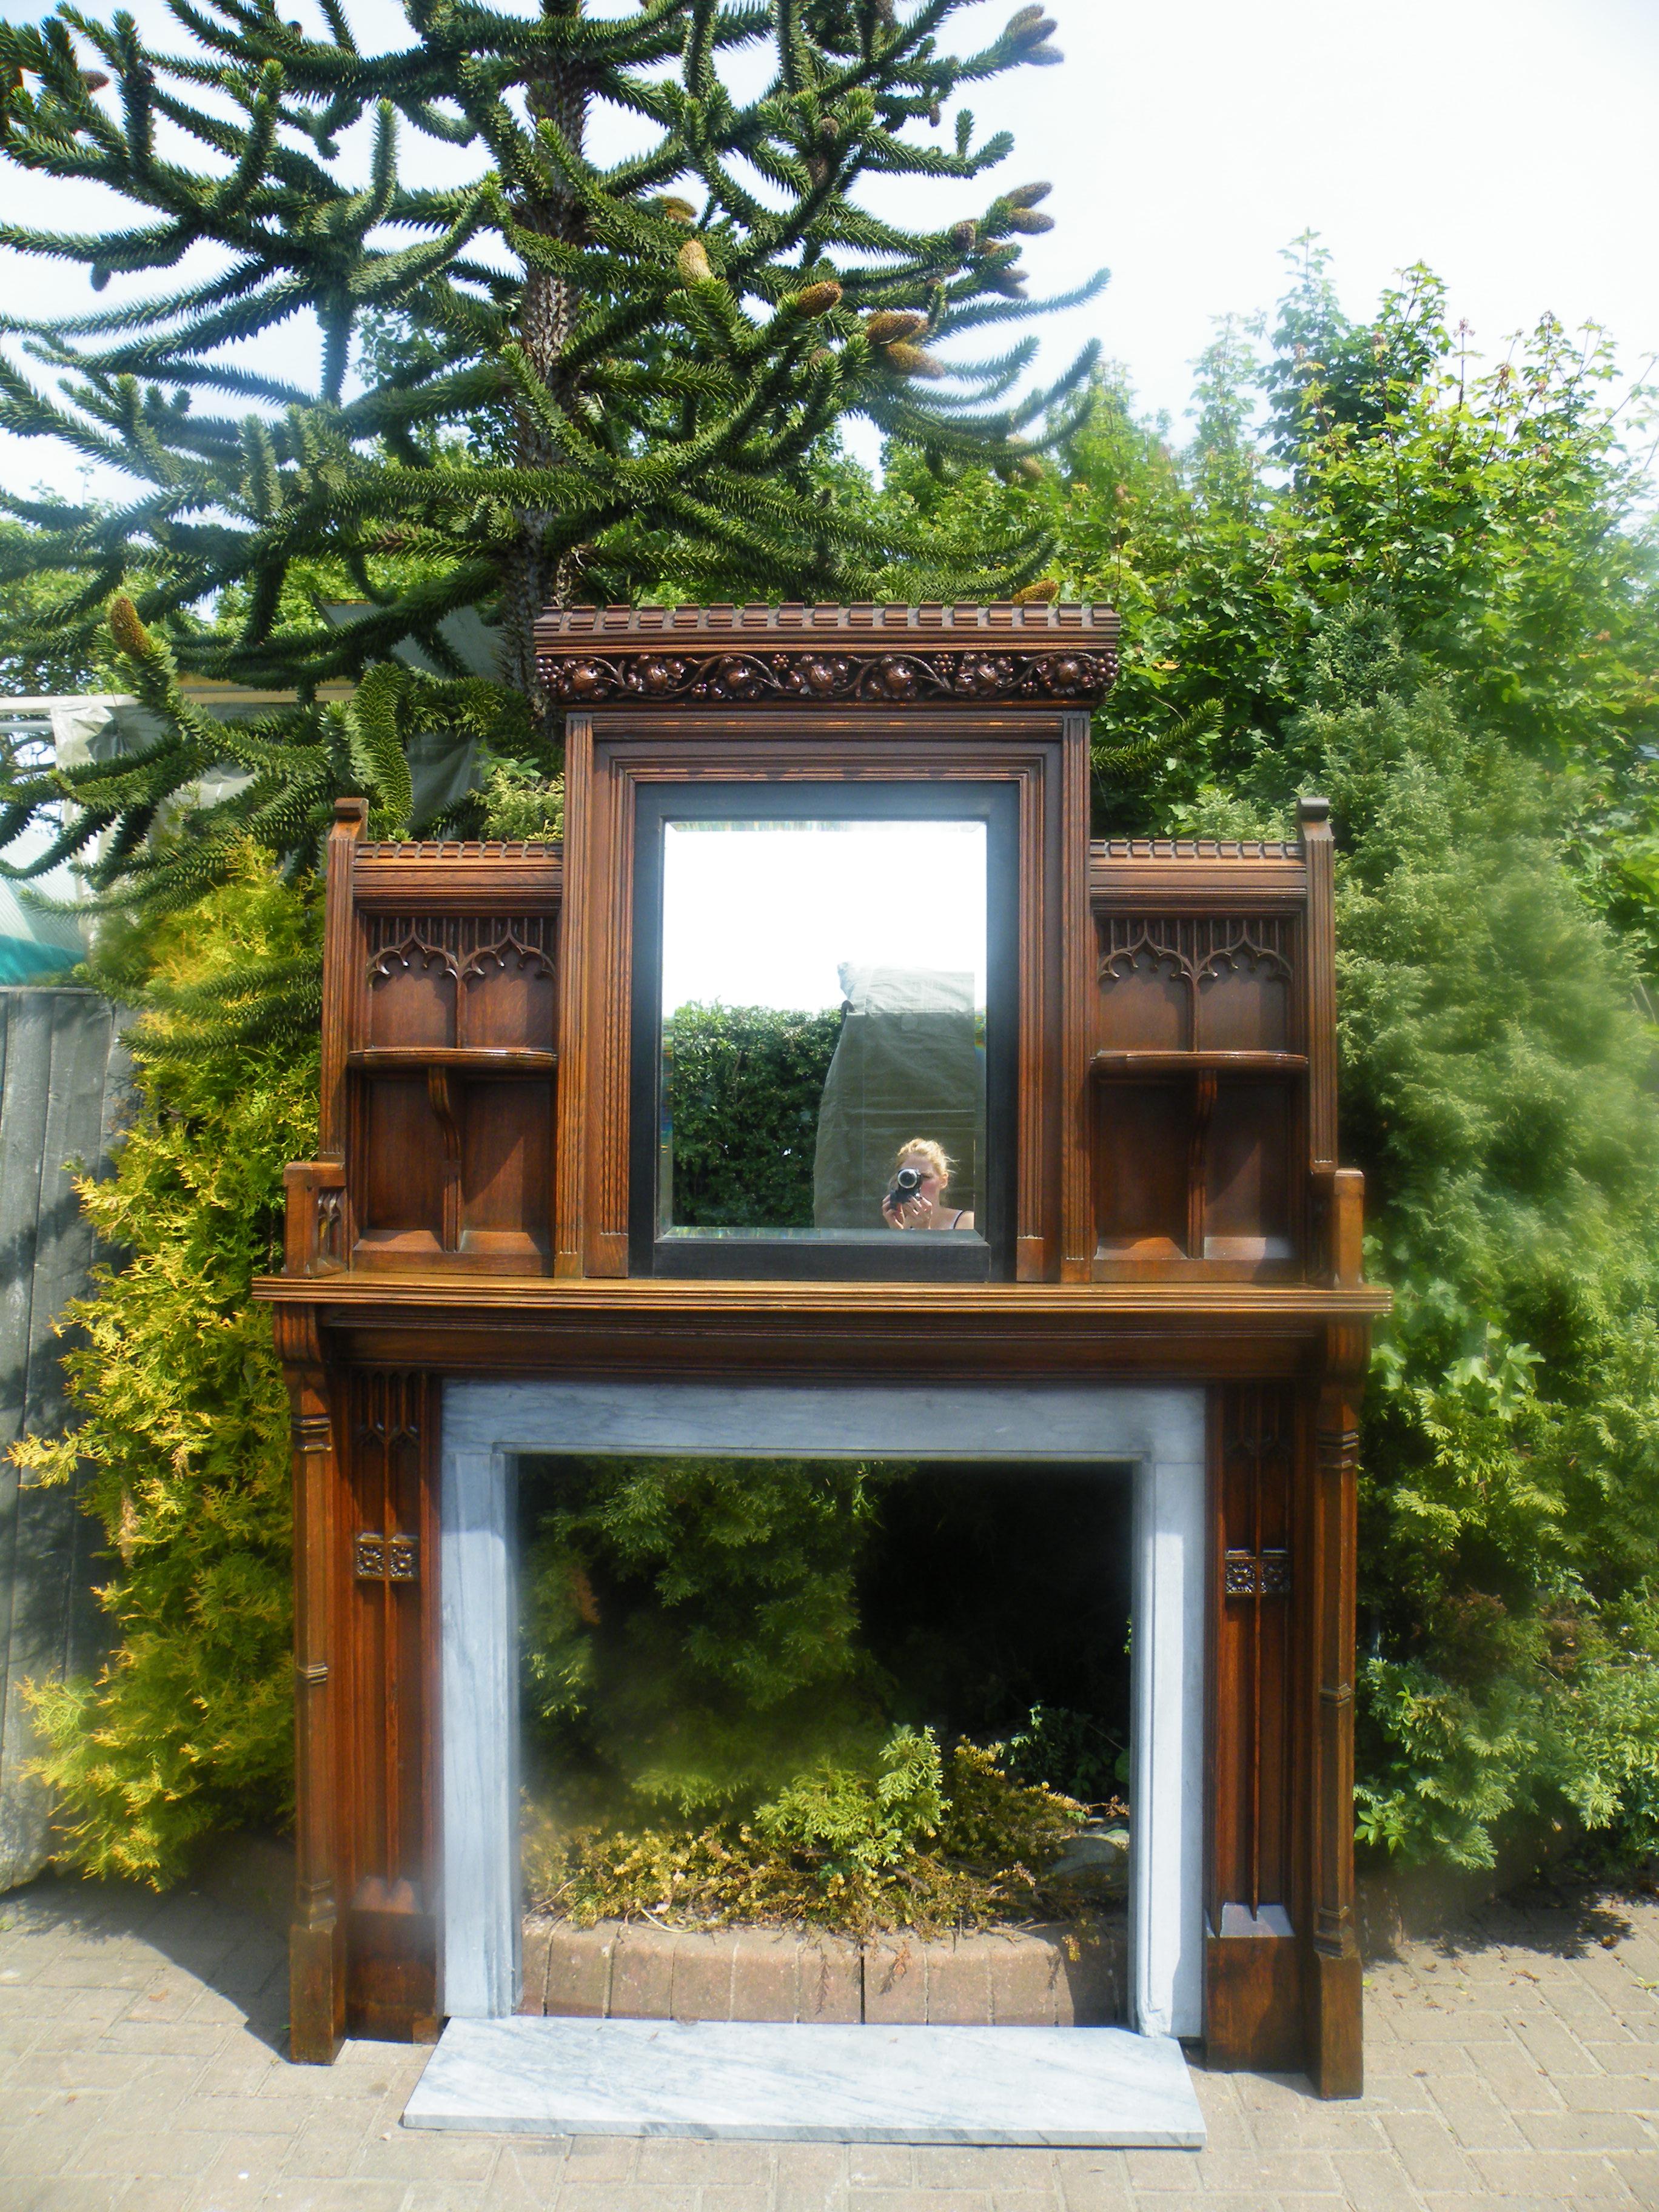 An imposing Reformed Gothic oak fireplace mantel surround 1870s with mirror in the manner of A.W.N Pugin. 

Modern Gothic, also known as Reformed Gothic, was an Aesthetic Movement style of the 1860s and 1870s in architecture, furniture and